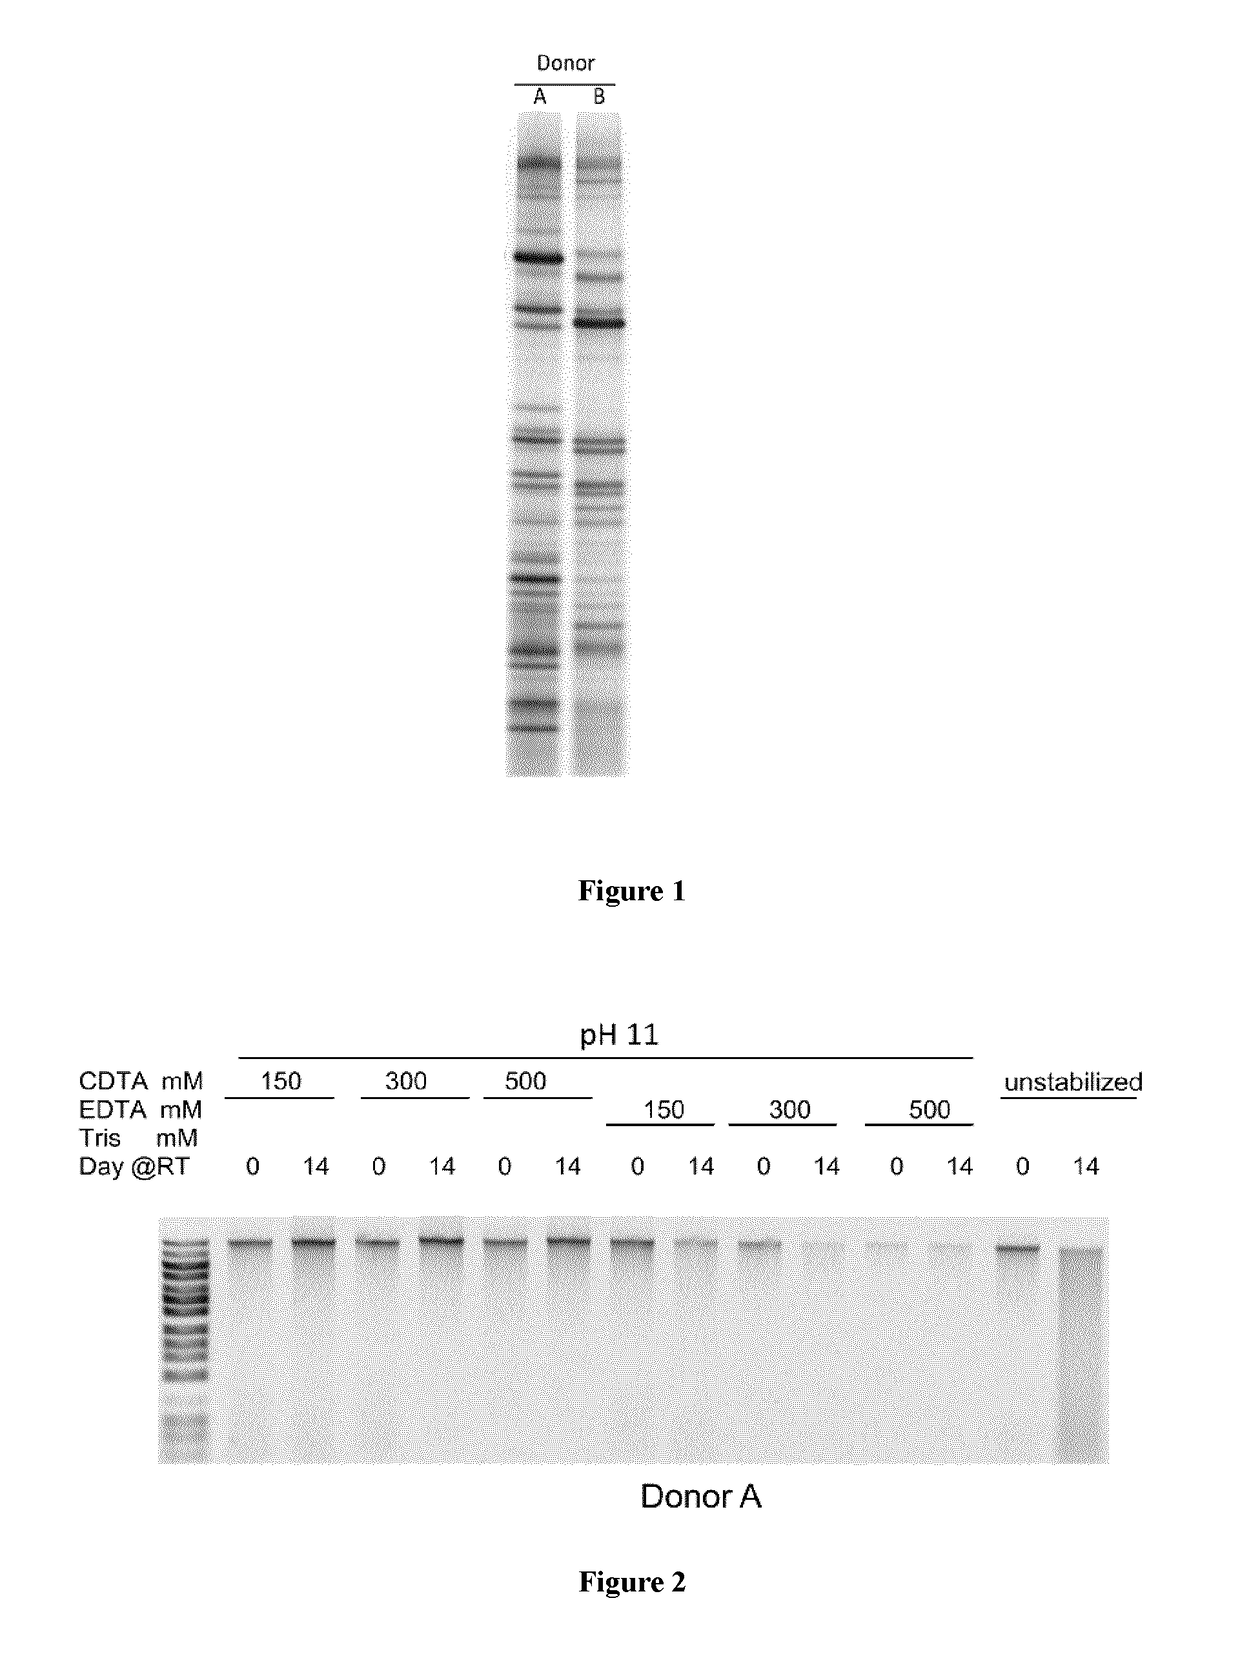 Composition and Method for Stabilizing Nucleic Acids in Biological Samples